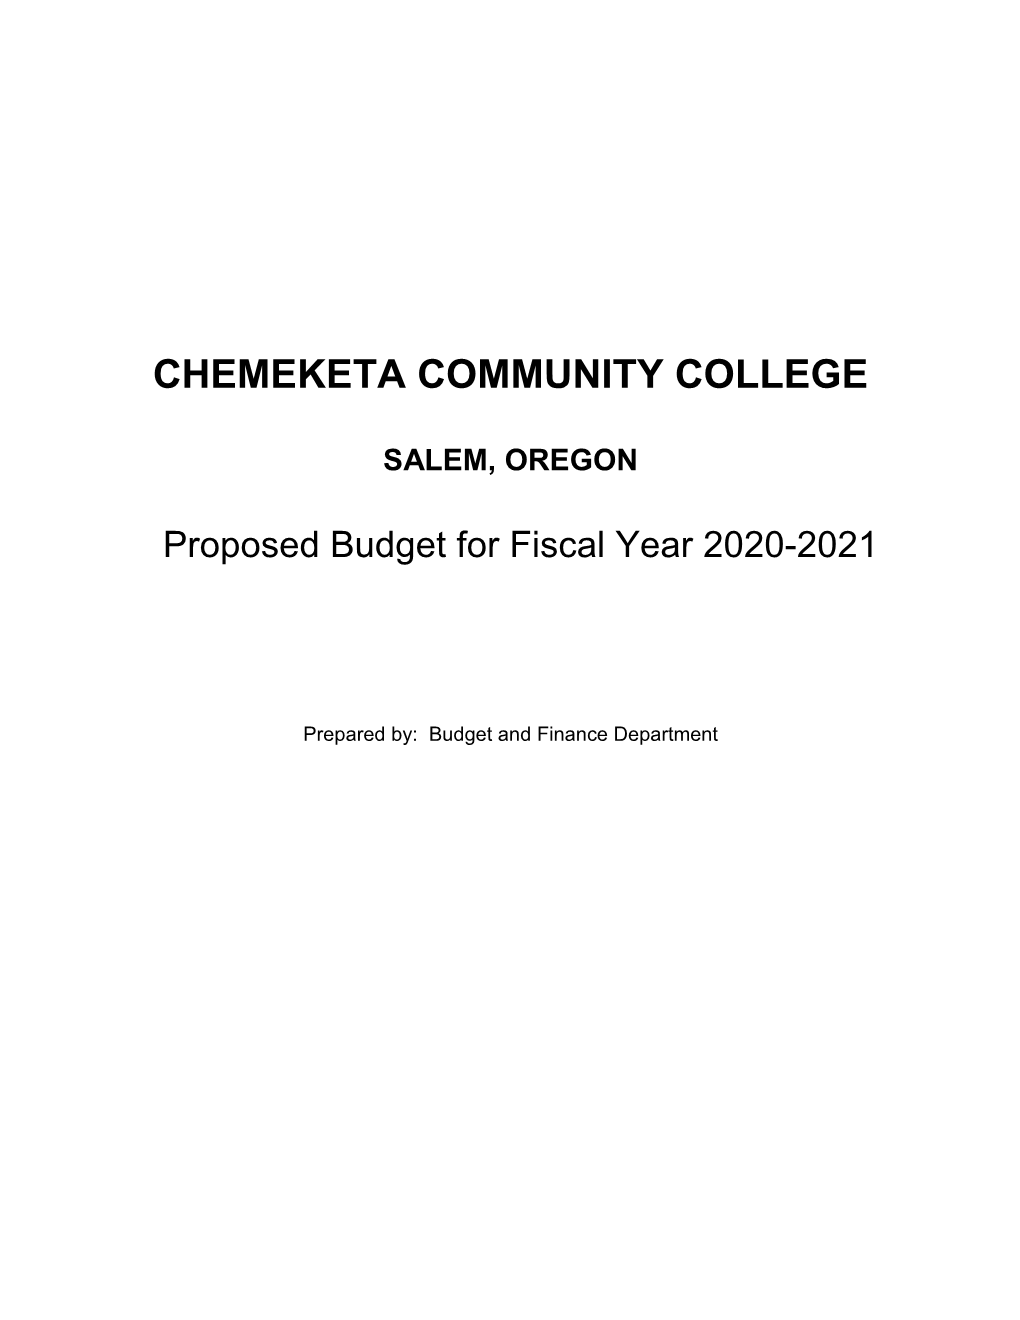 Proposed Budget for Fiscal Year 2020-2021